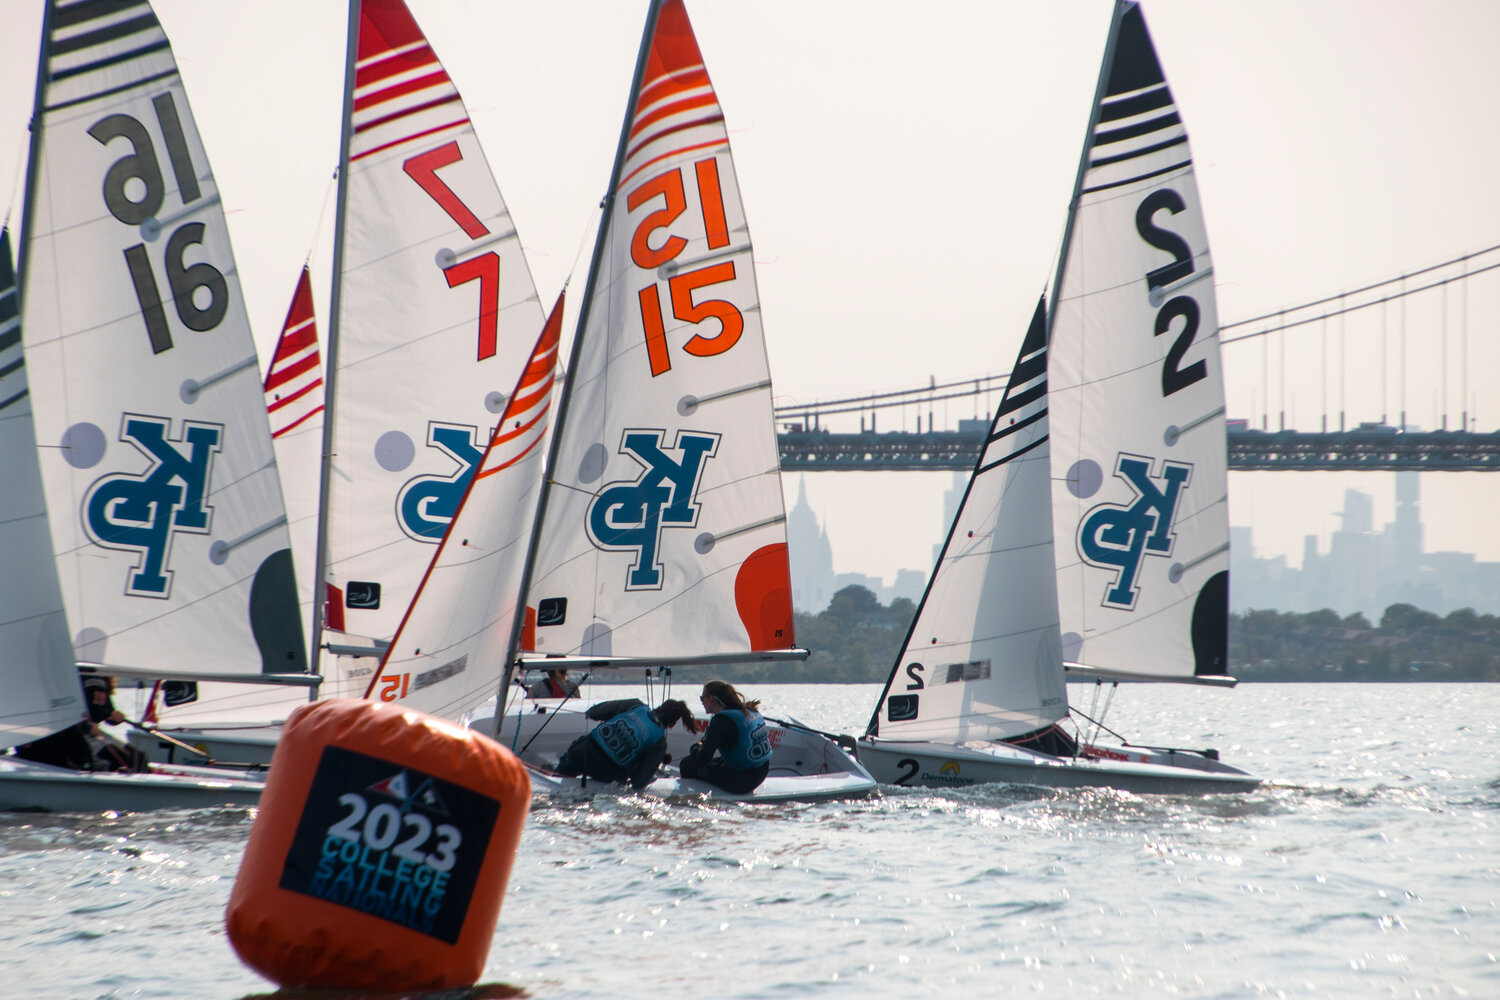 The top college teams in the nation compete at the Inter-Collegiate Sailing Association’s College Sailing Nationals at U.S. Merchant Marine Academy through June 2.